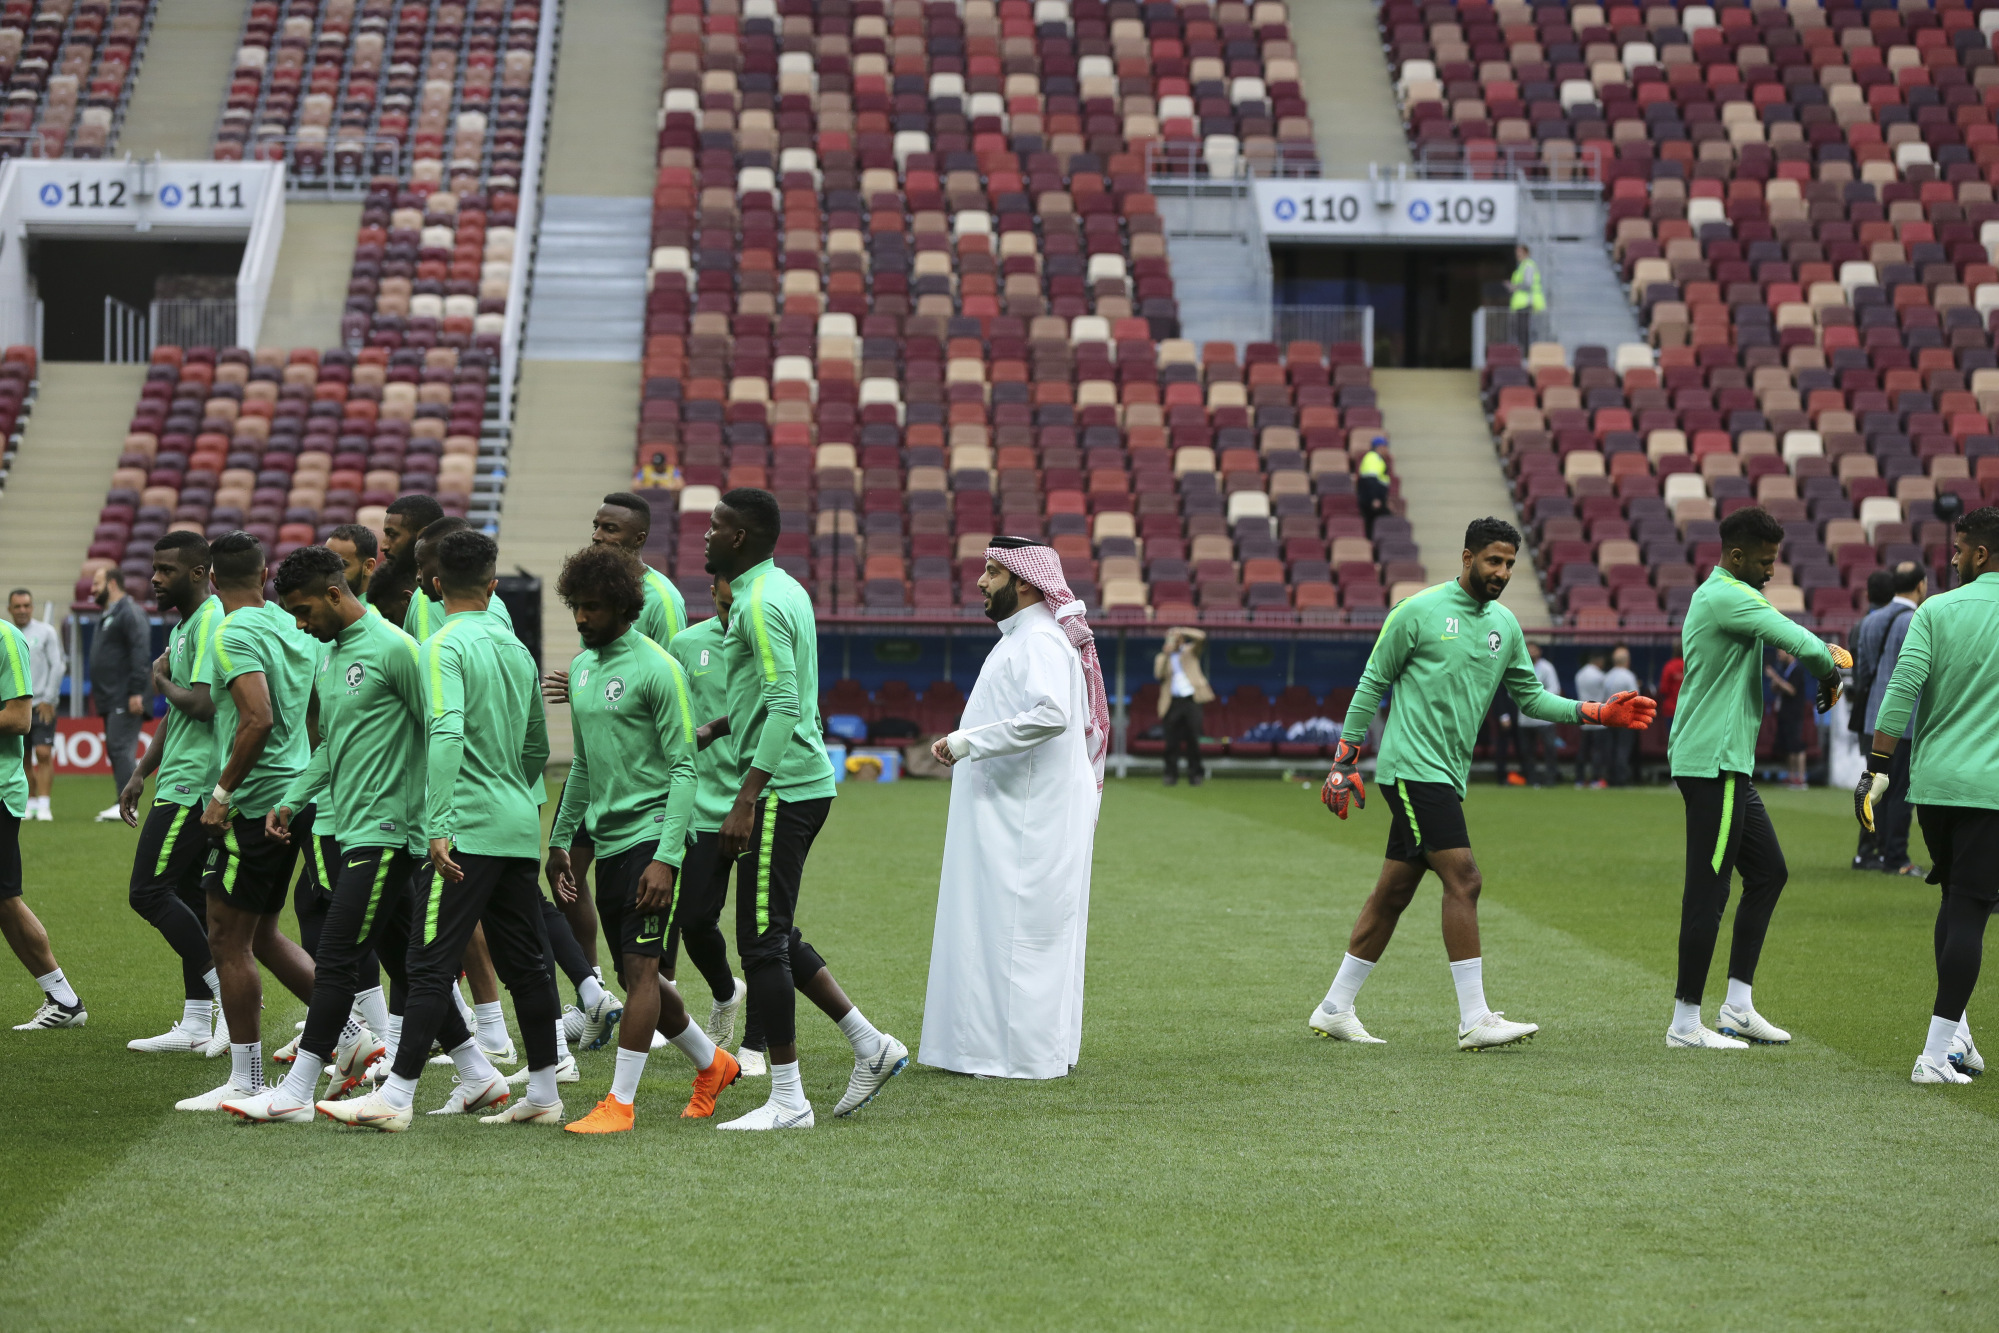 Turki Al Sheikh, Saudi Arabia's sports minister, center, joins the Saudi Arabia football team during a practice session ahead of the FIFA World Cup opening match at the Luzhniki stadium in Moscow, Russia, on Wednesday, June 13, 2018.  Photographer: Andrey Rudakov/Bloomberg